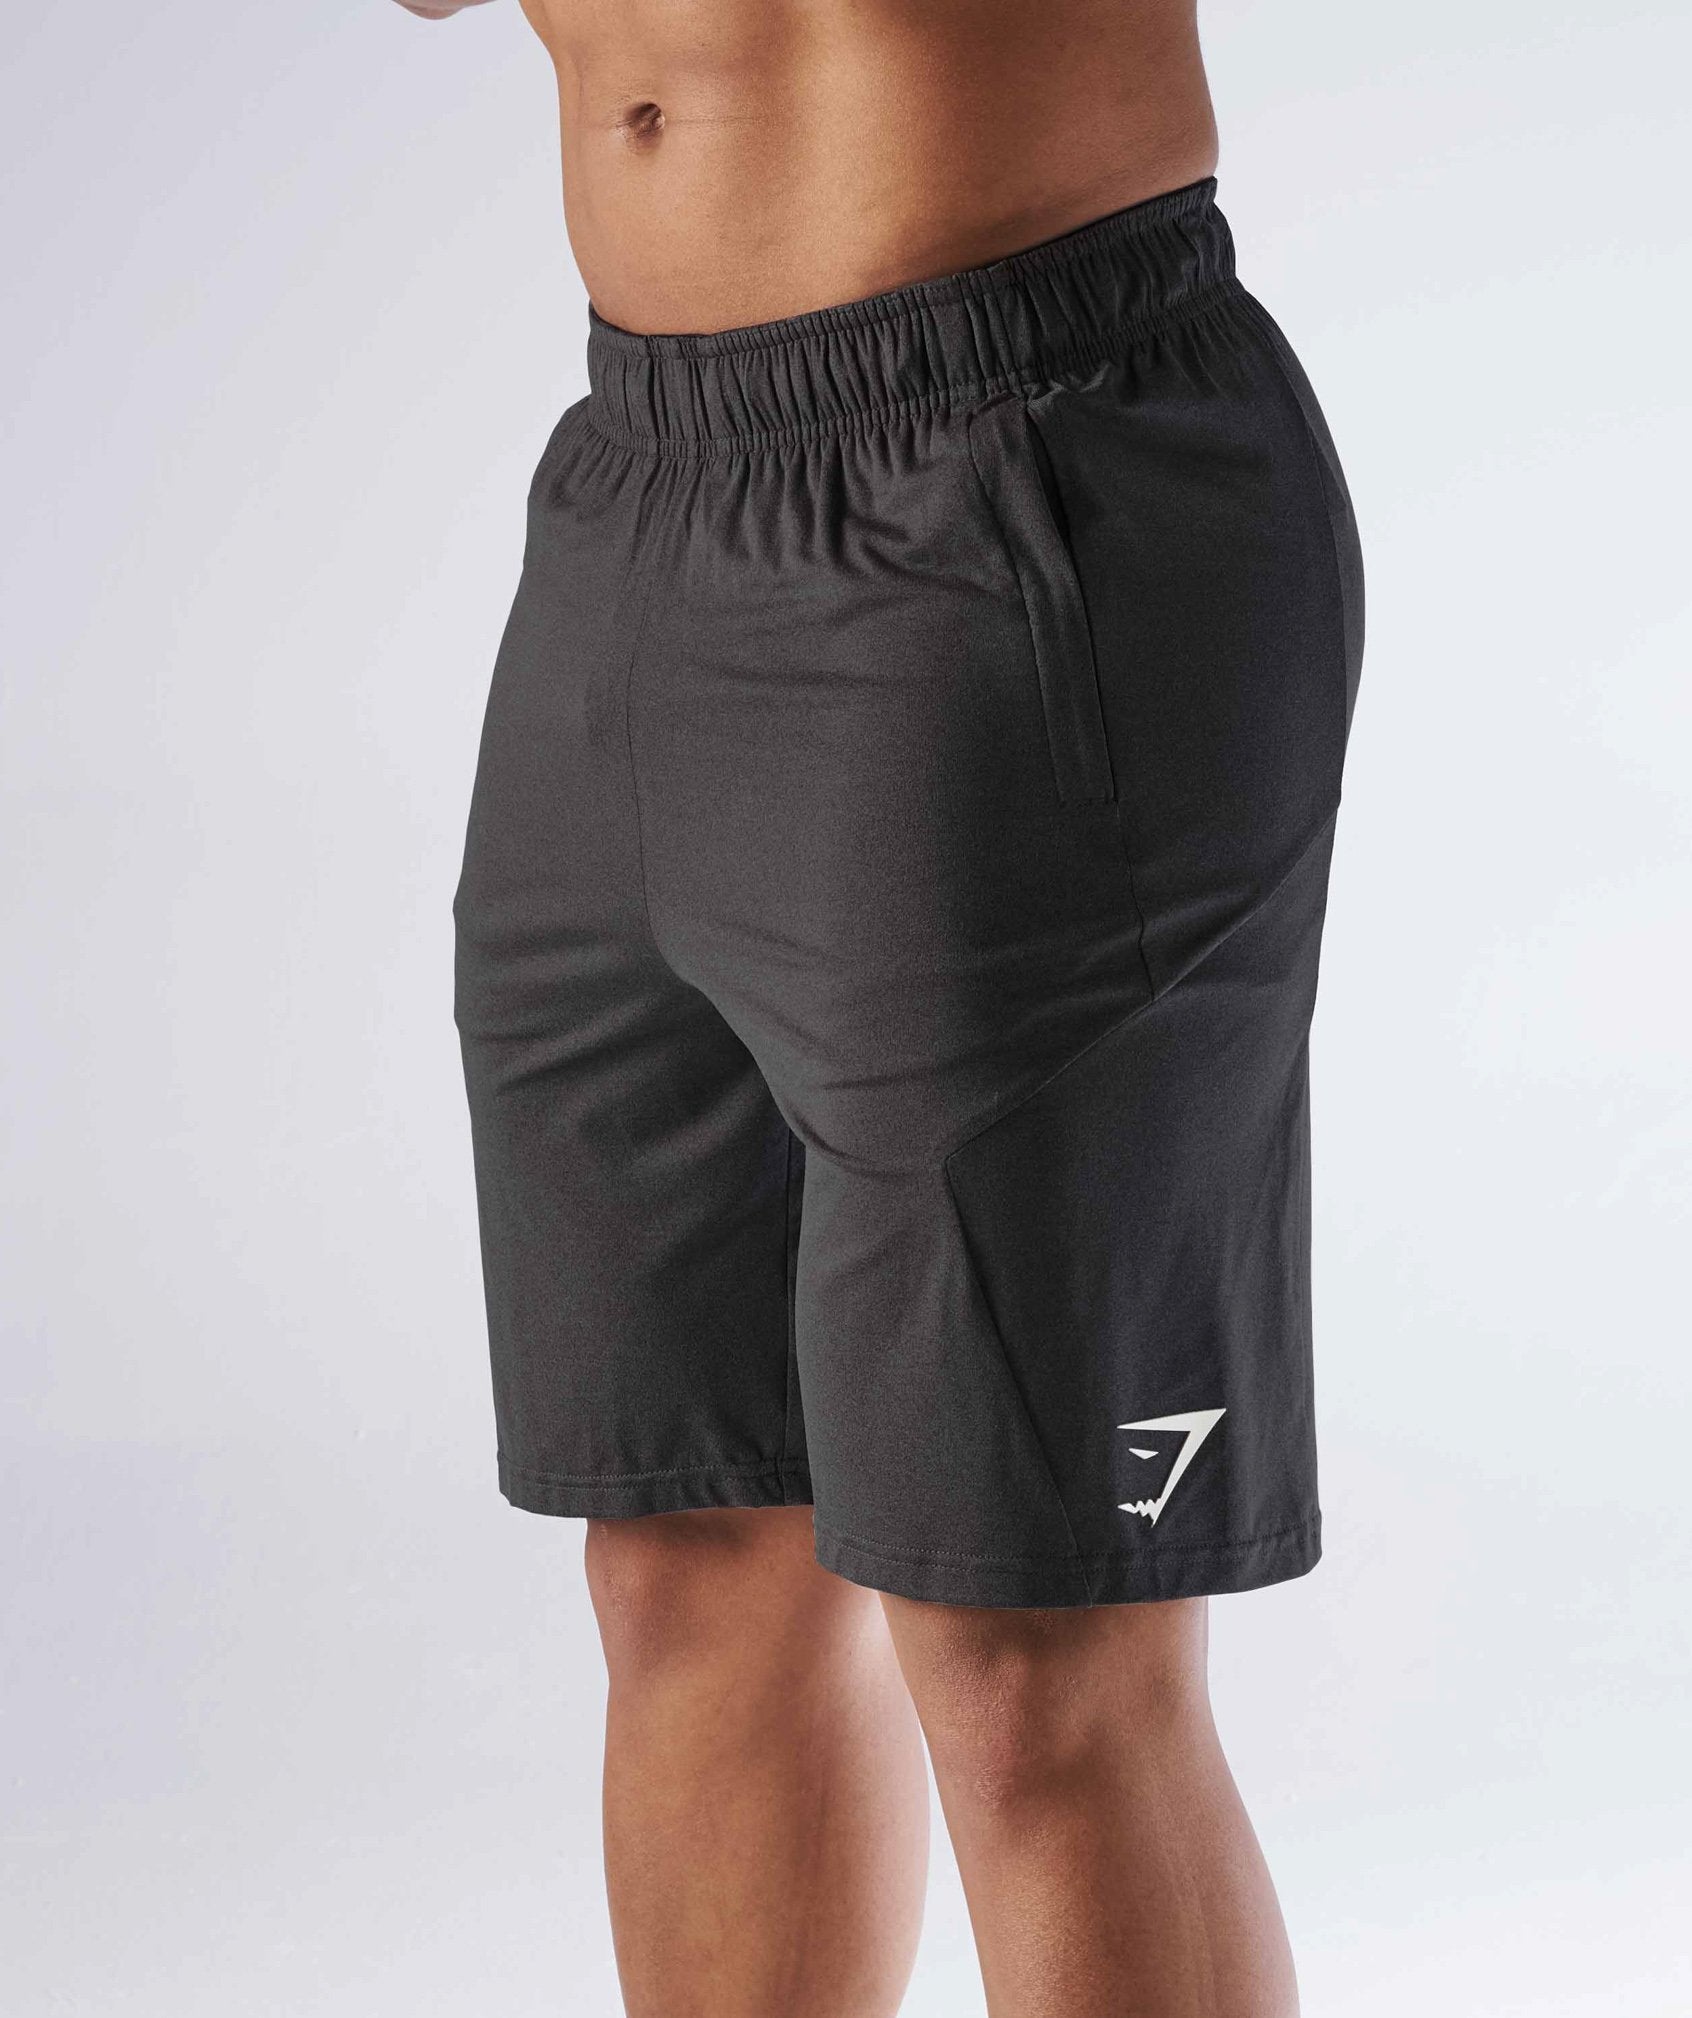 DRY Element Sweat Shorts in Black - view 5